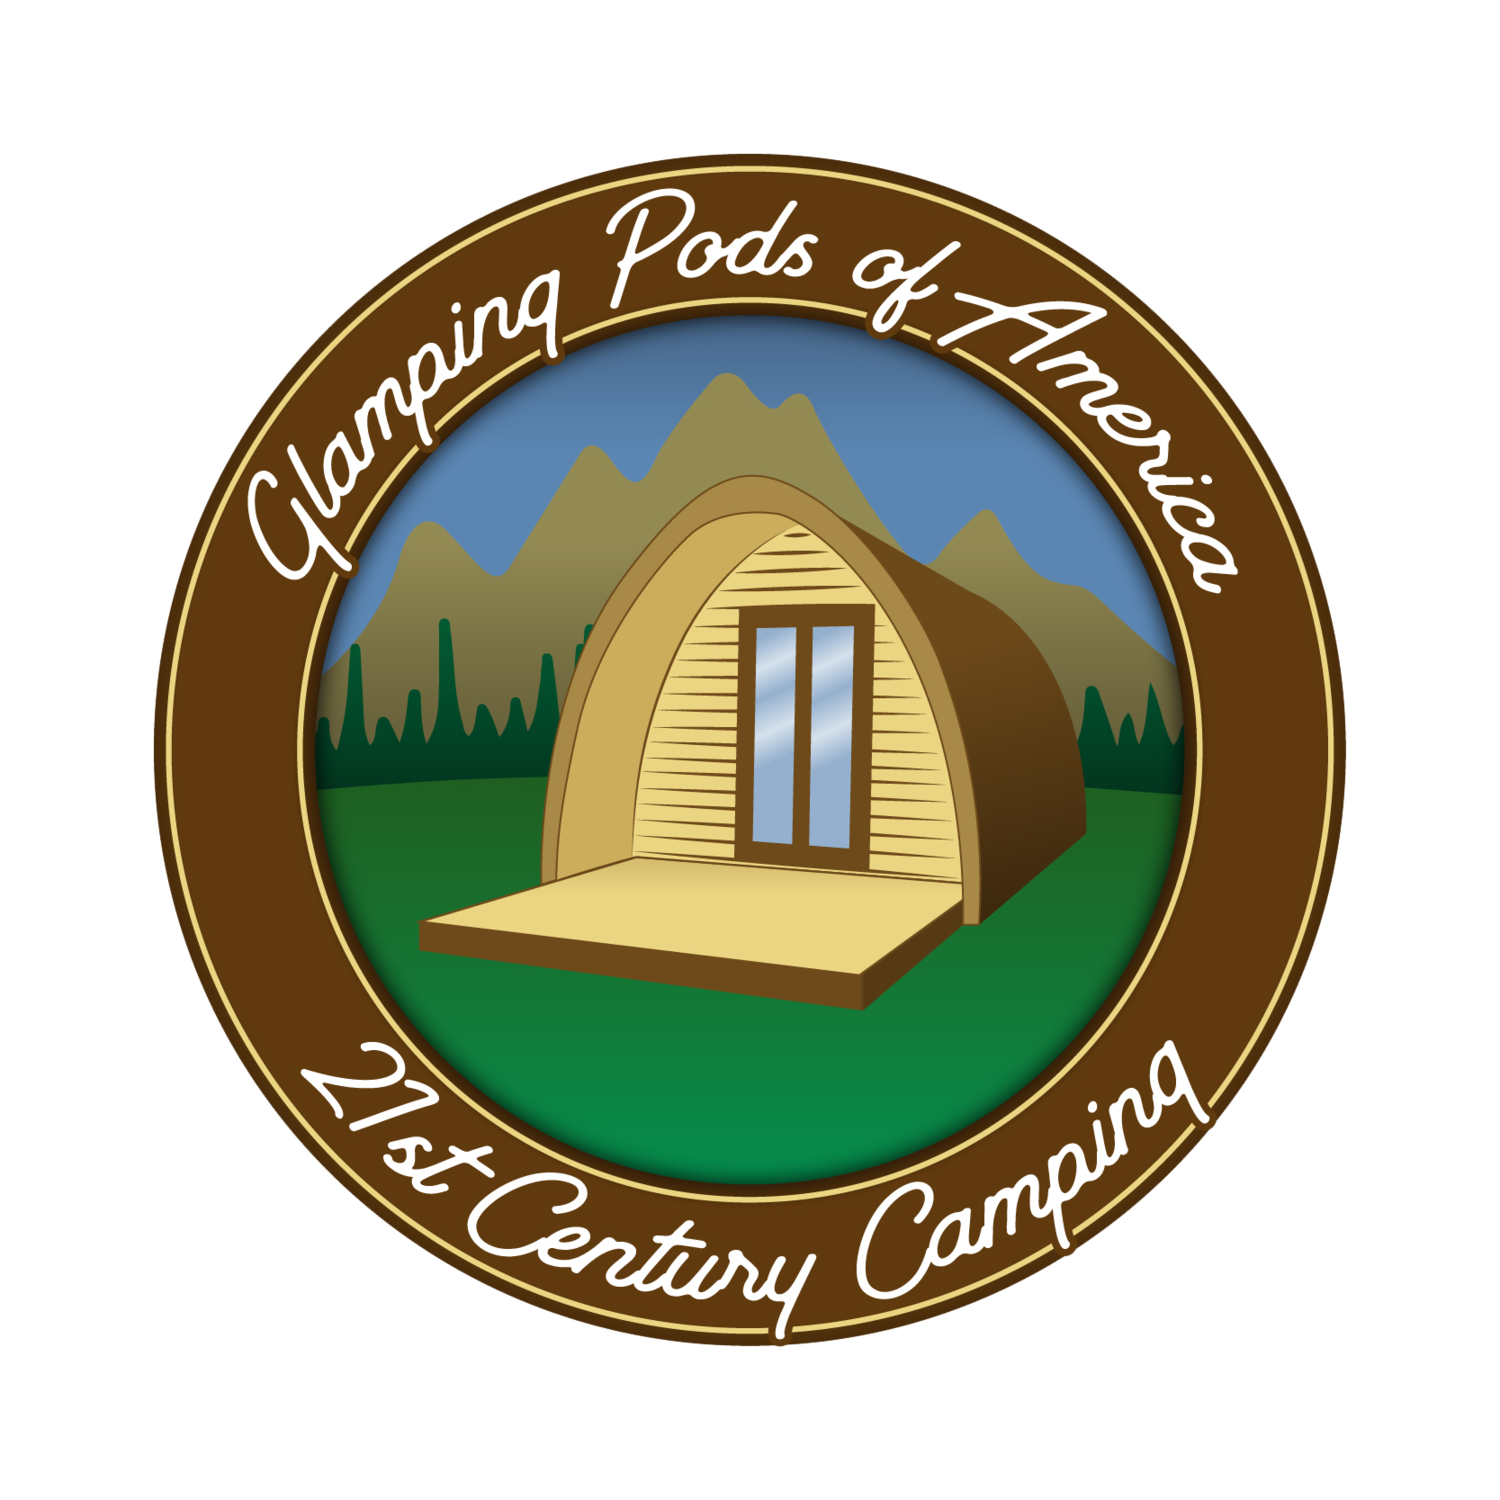 Glamping Pods of America